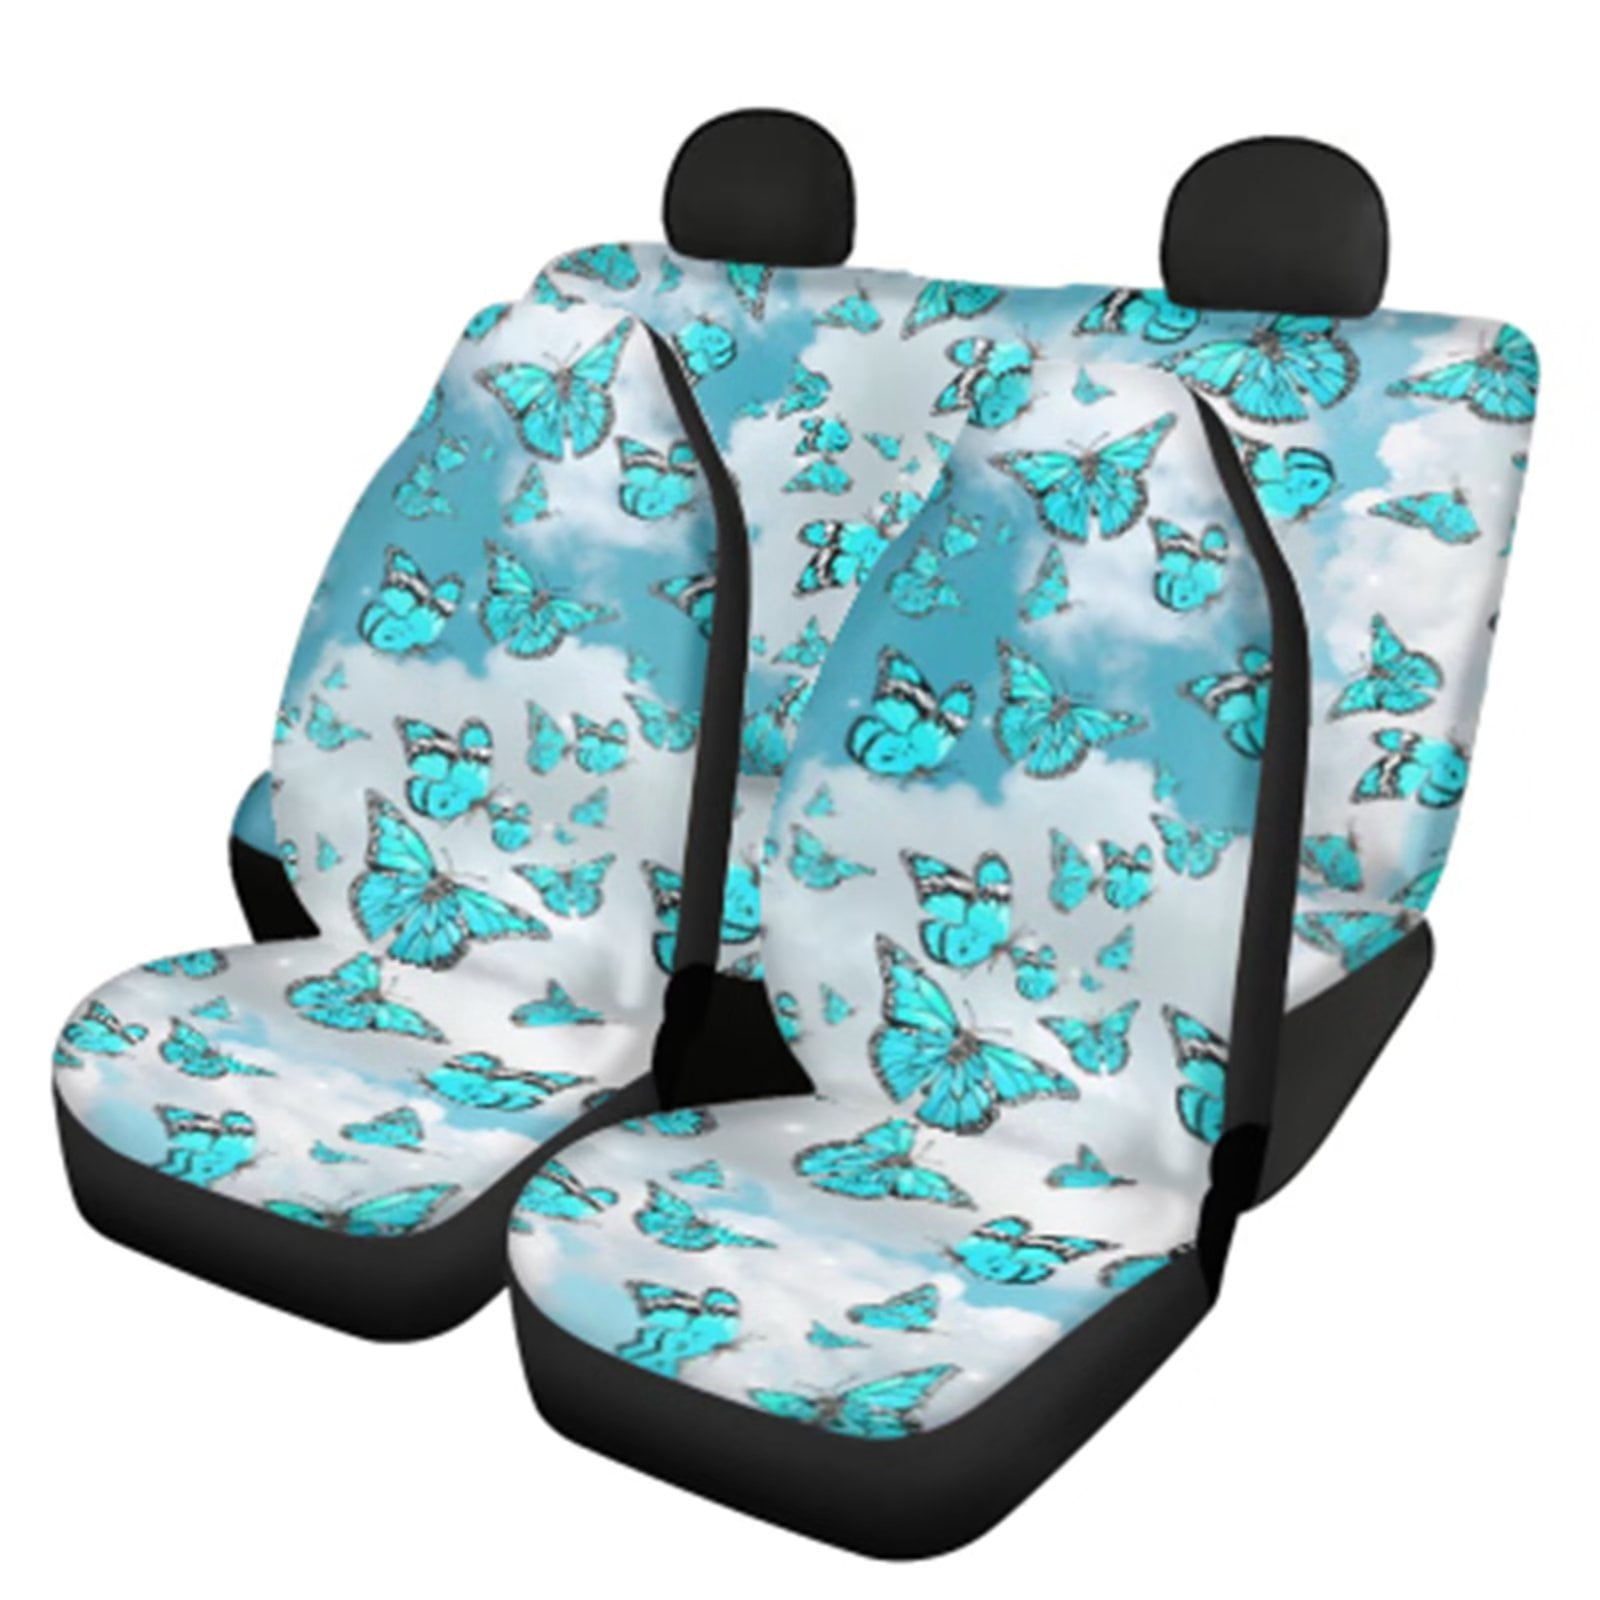 Fish Car Seat Covers Preppy Girl Car Accessories Funky Car Decor